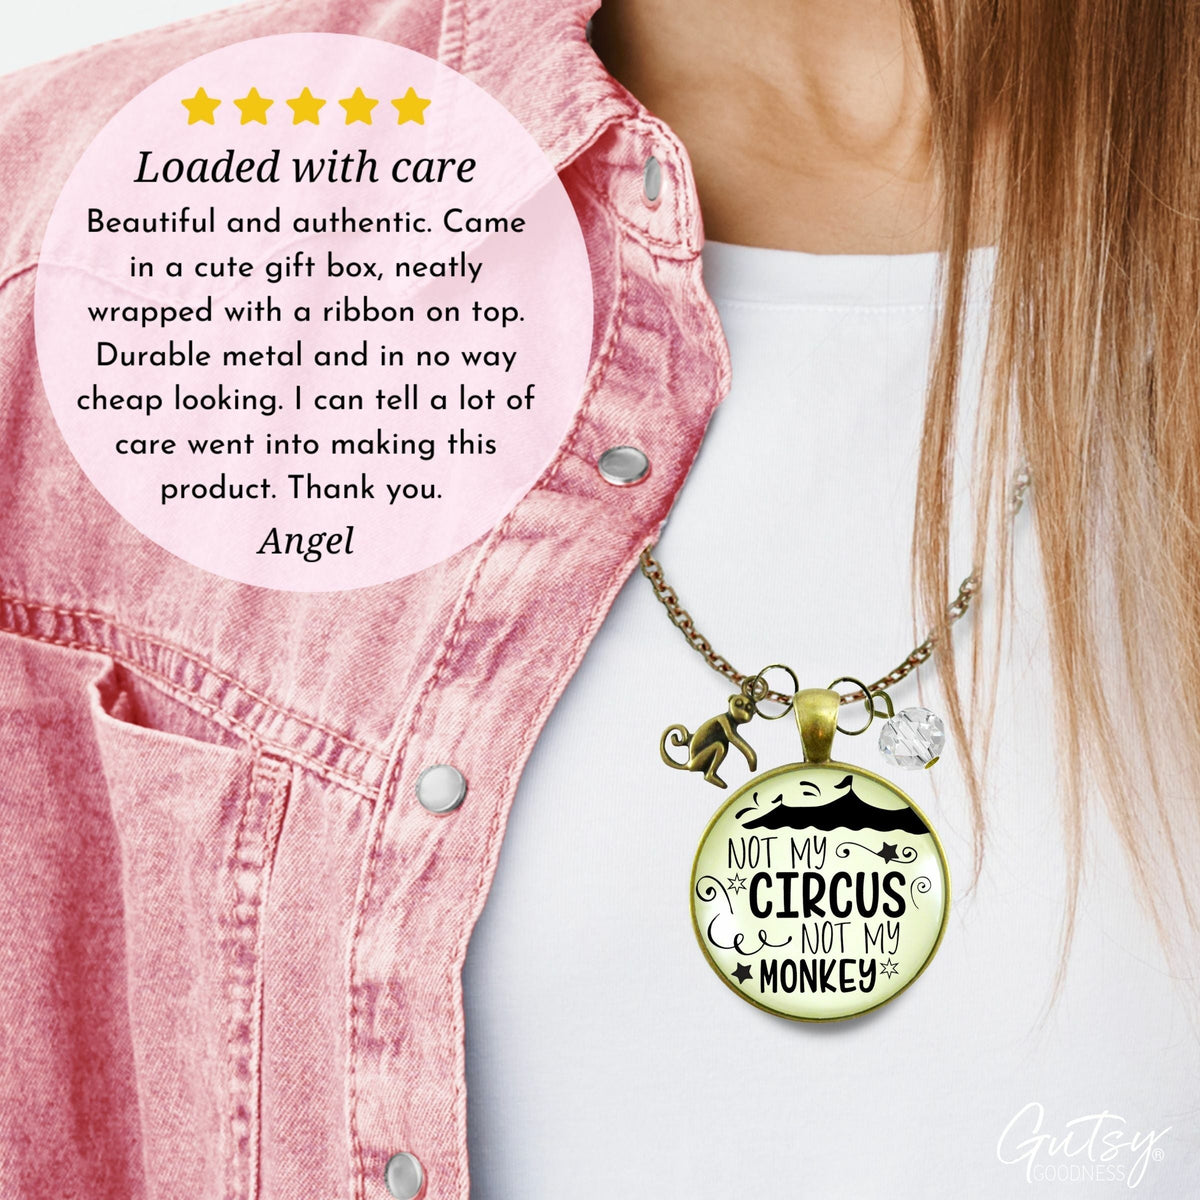 Gutsy Goodness Not My Circus Monkey Necklace Funny Attitude Novelty Jewelry Quote - Gutsy Goodness Handmade Jewelry;Not My Circus Monkey Necklace Funny Attitude Novelty Jewelry Quote - Gutsy Goodness Handmade Jewelry Gifts